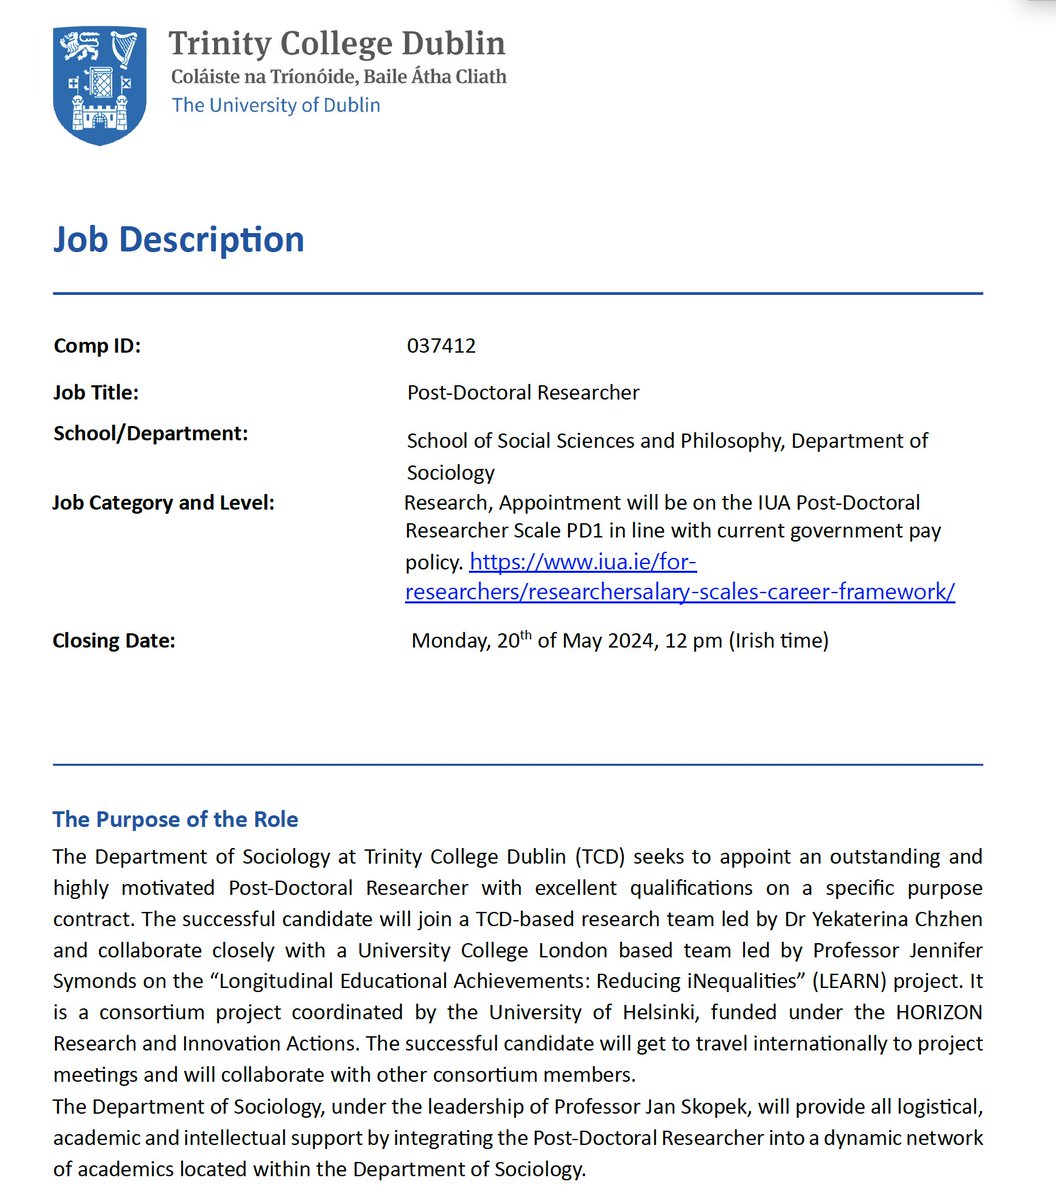 Join me, @Jenny_Symonds and others on the LEARN team to work on educational inequalities! #PostdocPosition at @TCDsociology Deadline: 20th May. Duration: 30 months. APPLY here: tcd.ie/sociology/vaca… LEARN - Horizon project: cordis.europa.eu/project/id/101…